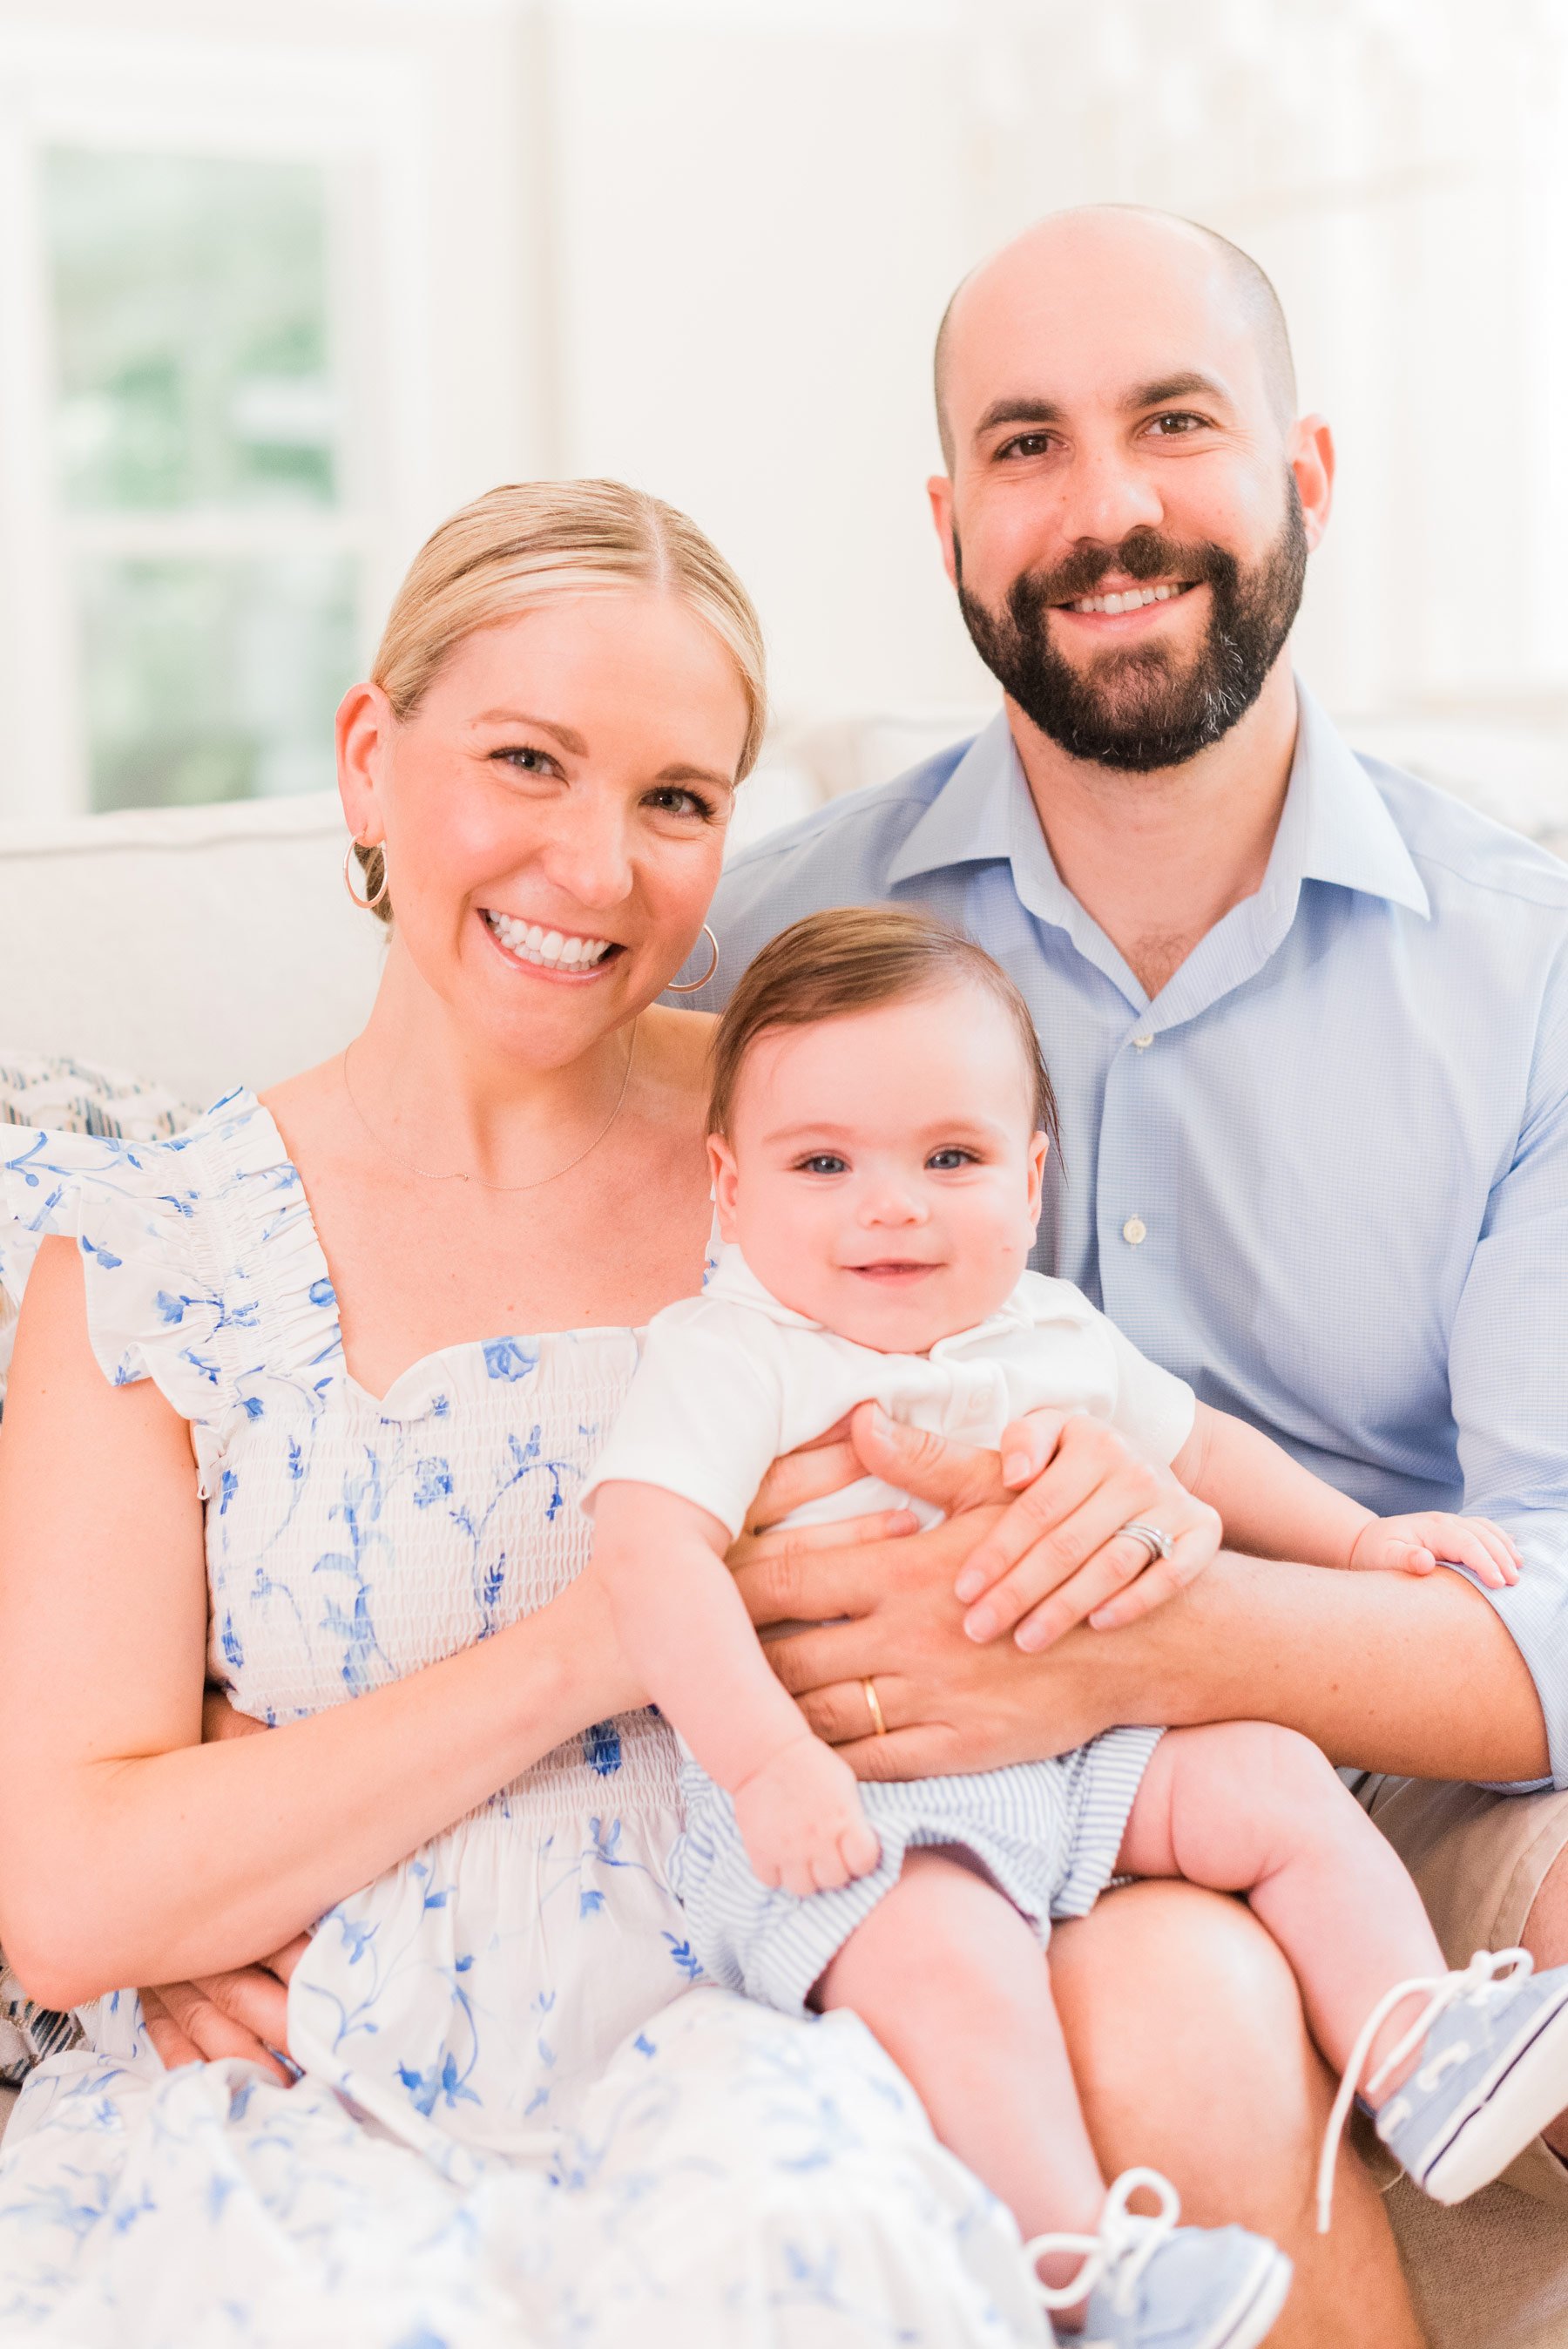  The cutest young family of three sit close together for an in-home portrait session by Jacquie Erickson Photography, an Atlanta based photographer.&nbsp; #inhomeportraitsessions #familyphotos #portraitphotography #atlantaphotographer #jacquieerickso